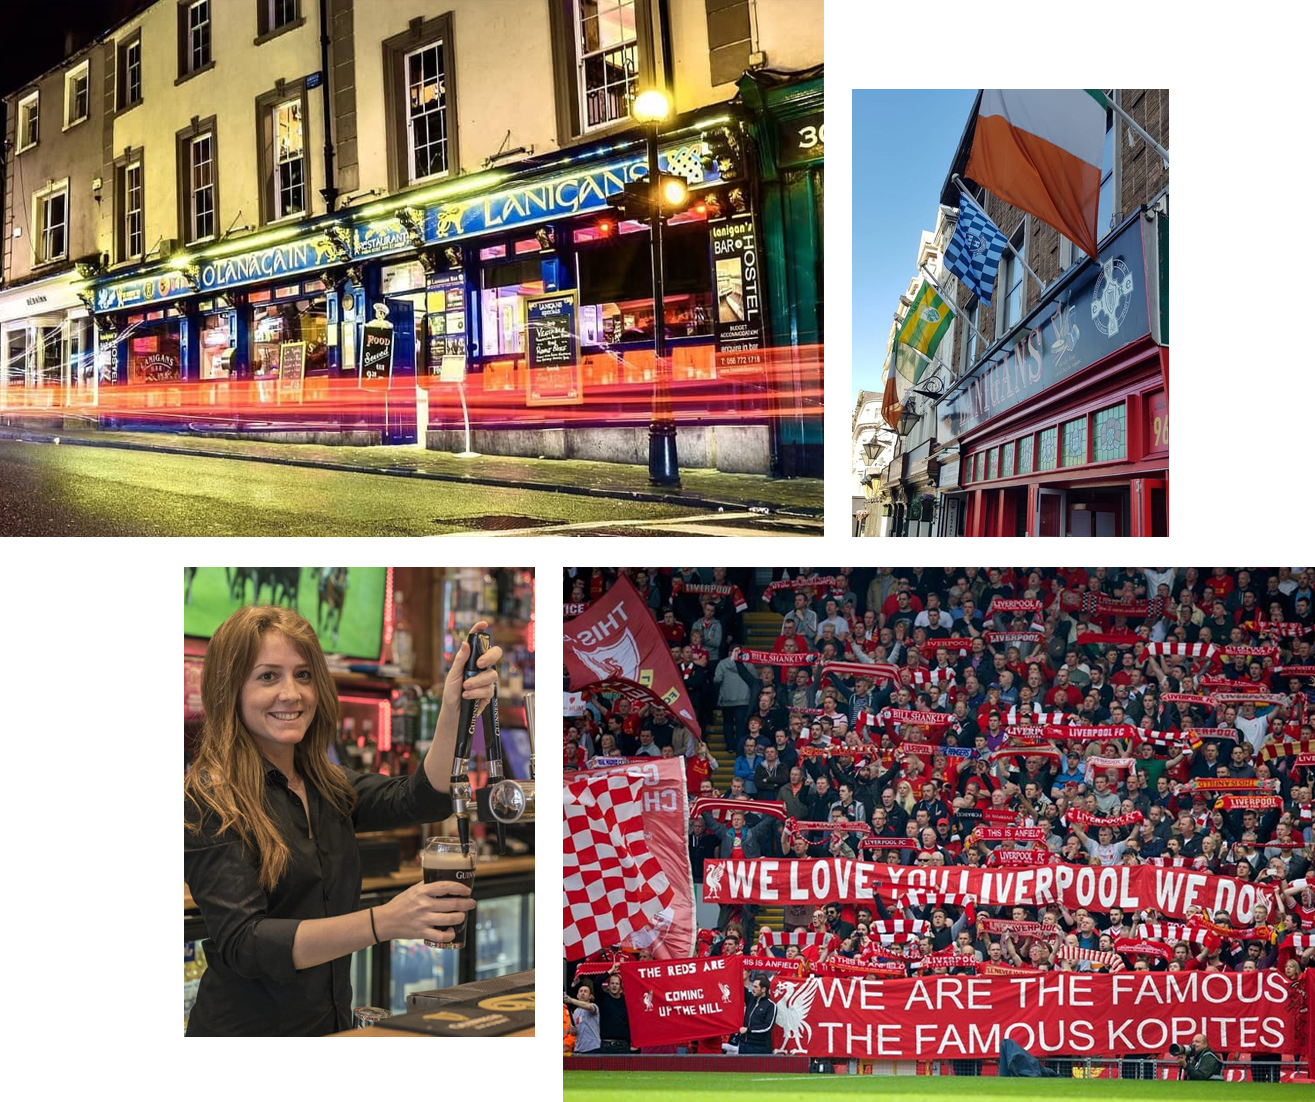 Lanigans bars, barmaid and Liverpool FC fans.